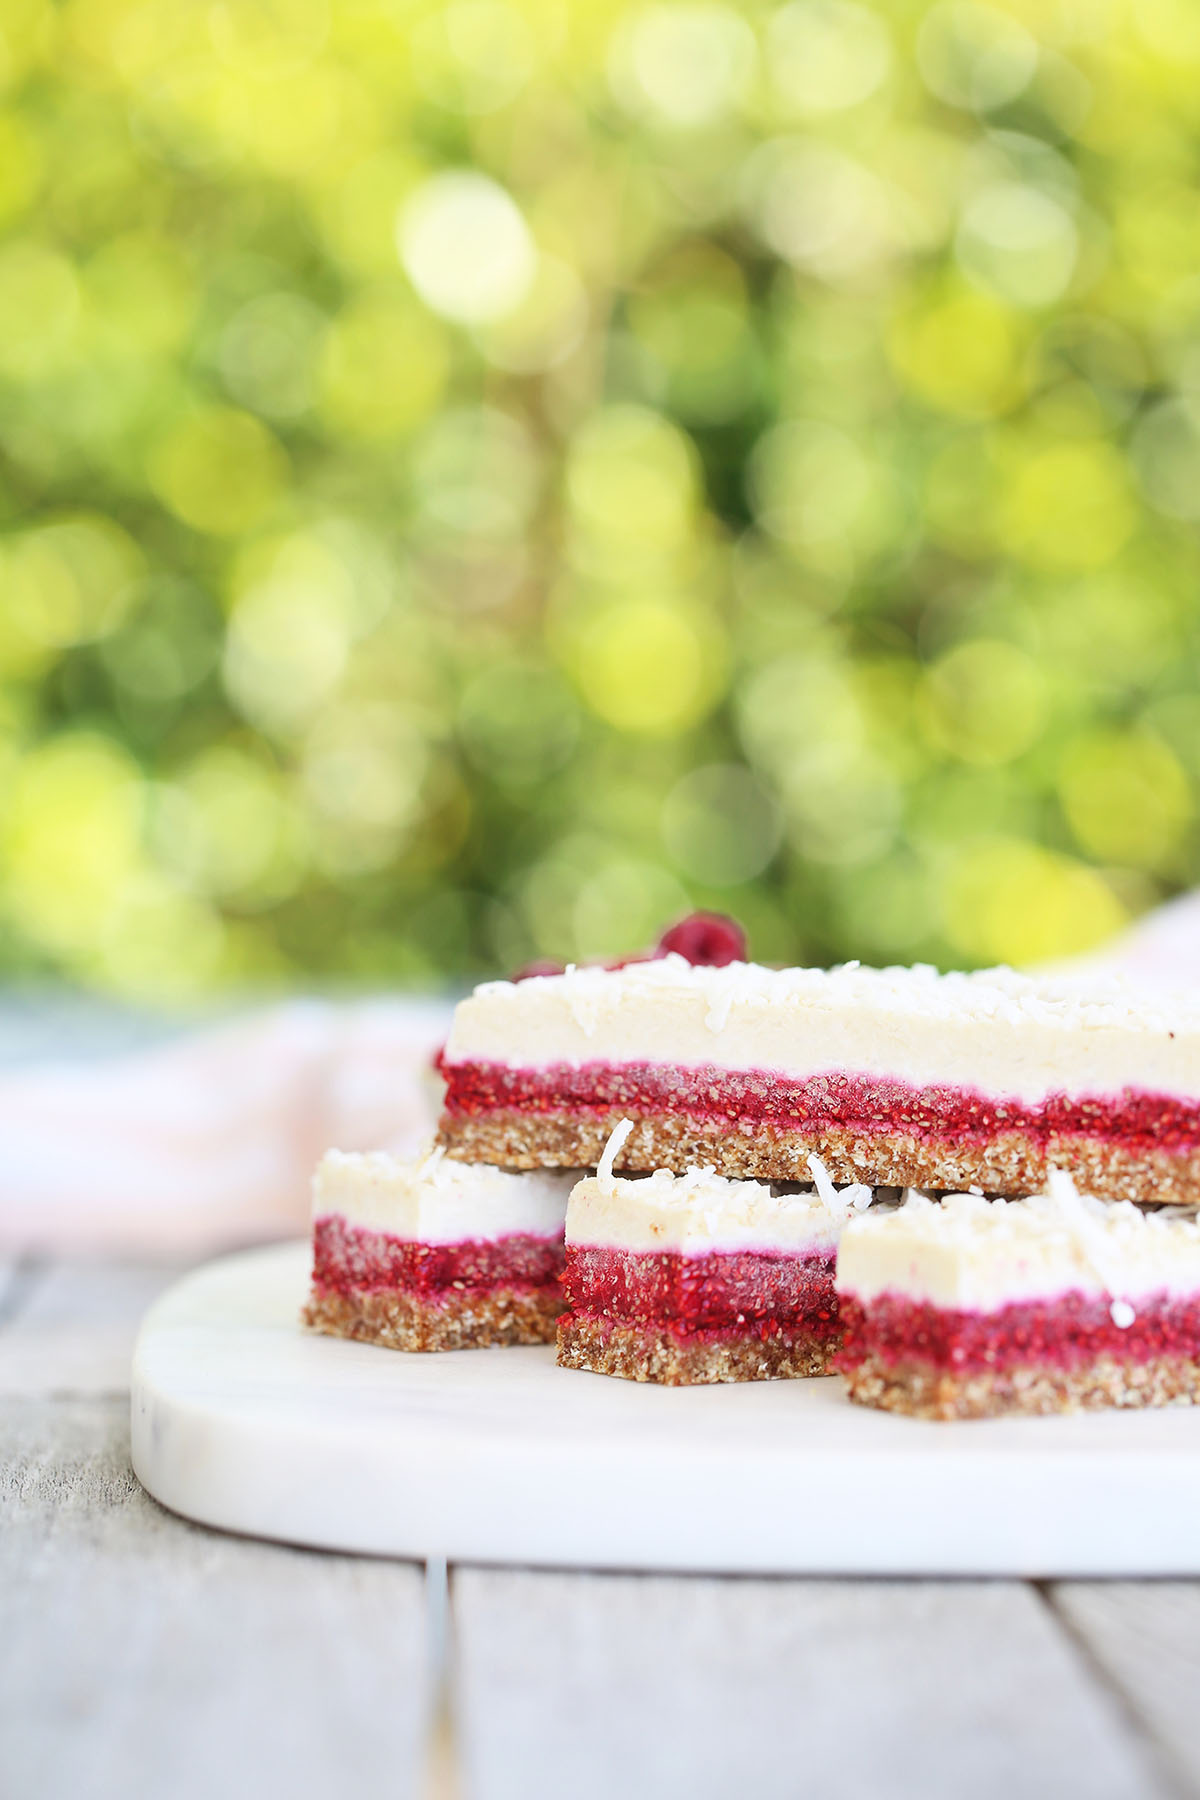 A true slice of kiwiana, made with a buttery biscuit base, rich raspberry jam, and delicately crisp coconut meringue topping. This time – healthified. Vegan, wheat free, dairy free + low sugar.